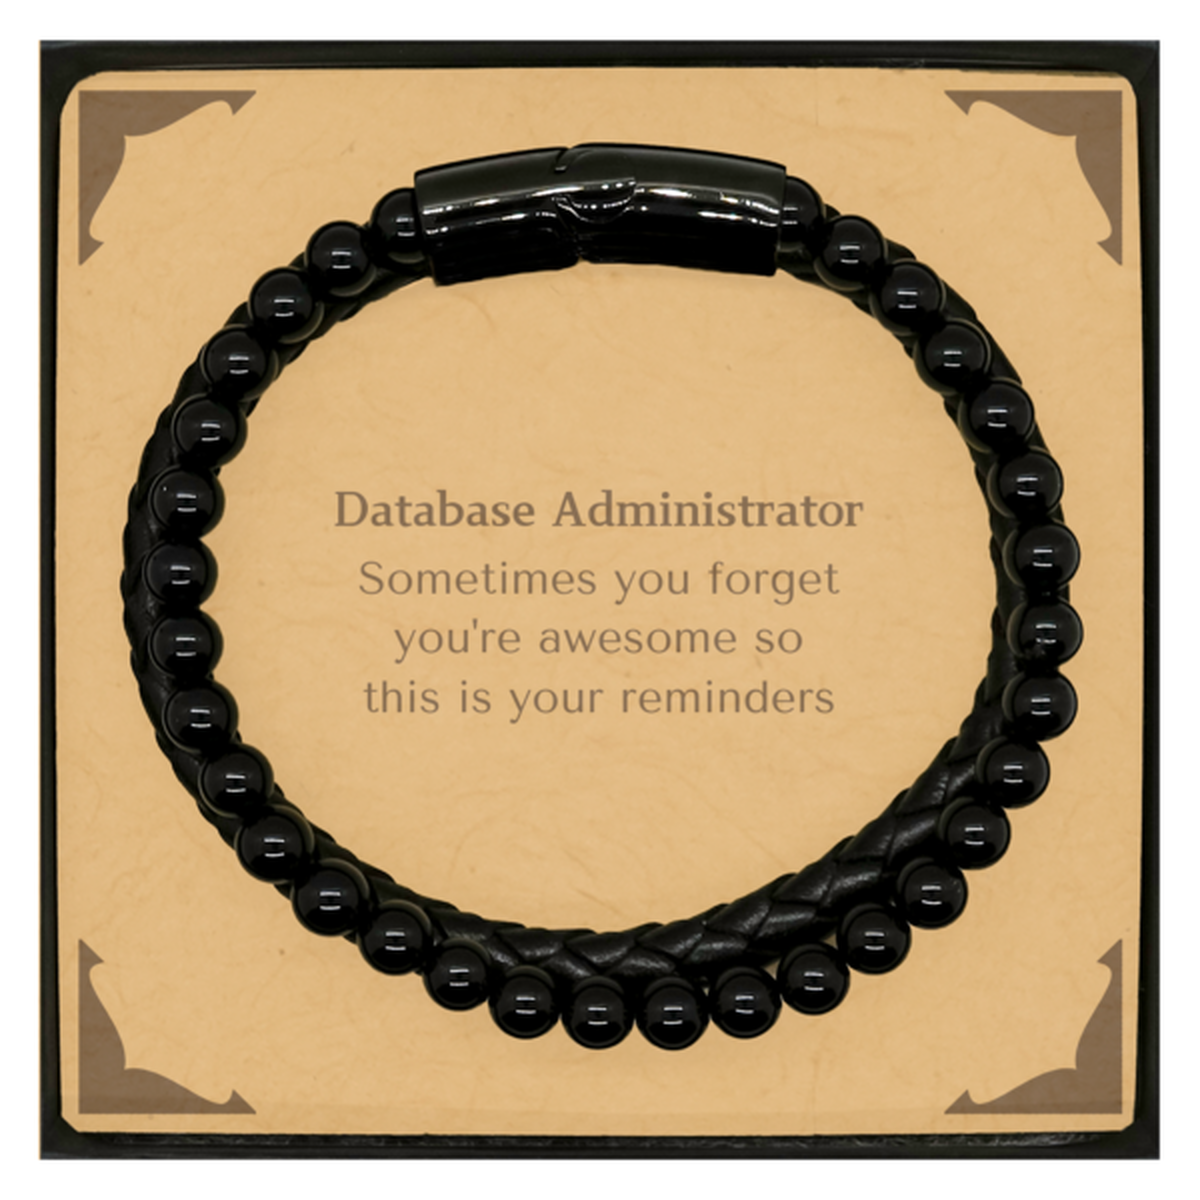 Sentimental Database Administrator Stone Leather Bracelets, Database Administrator Sometimes you forget you're awesome so this is your reminders, Graduation Christmas Birthday Gifts for Database Administrator, Men, Women, Coworkers